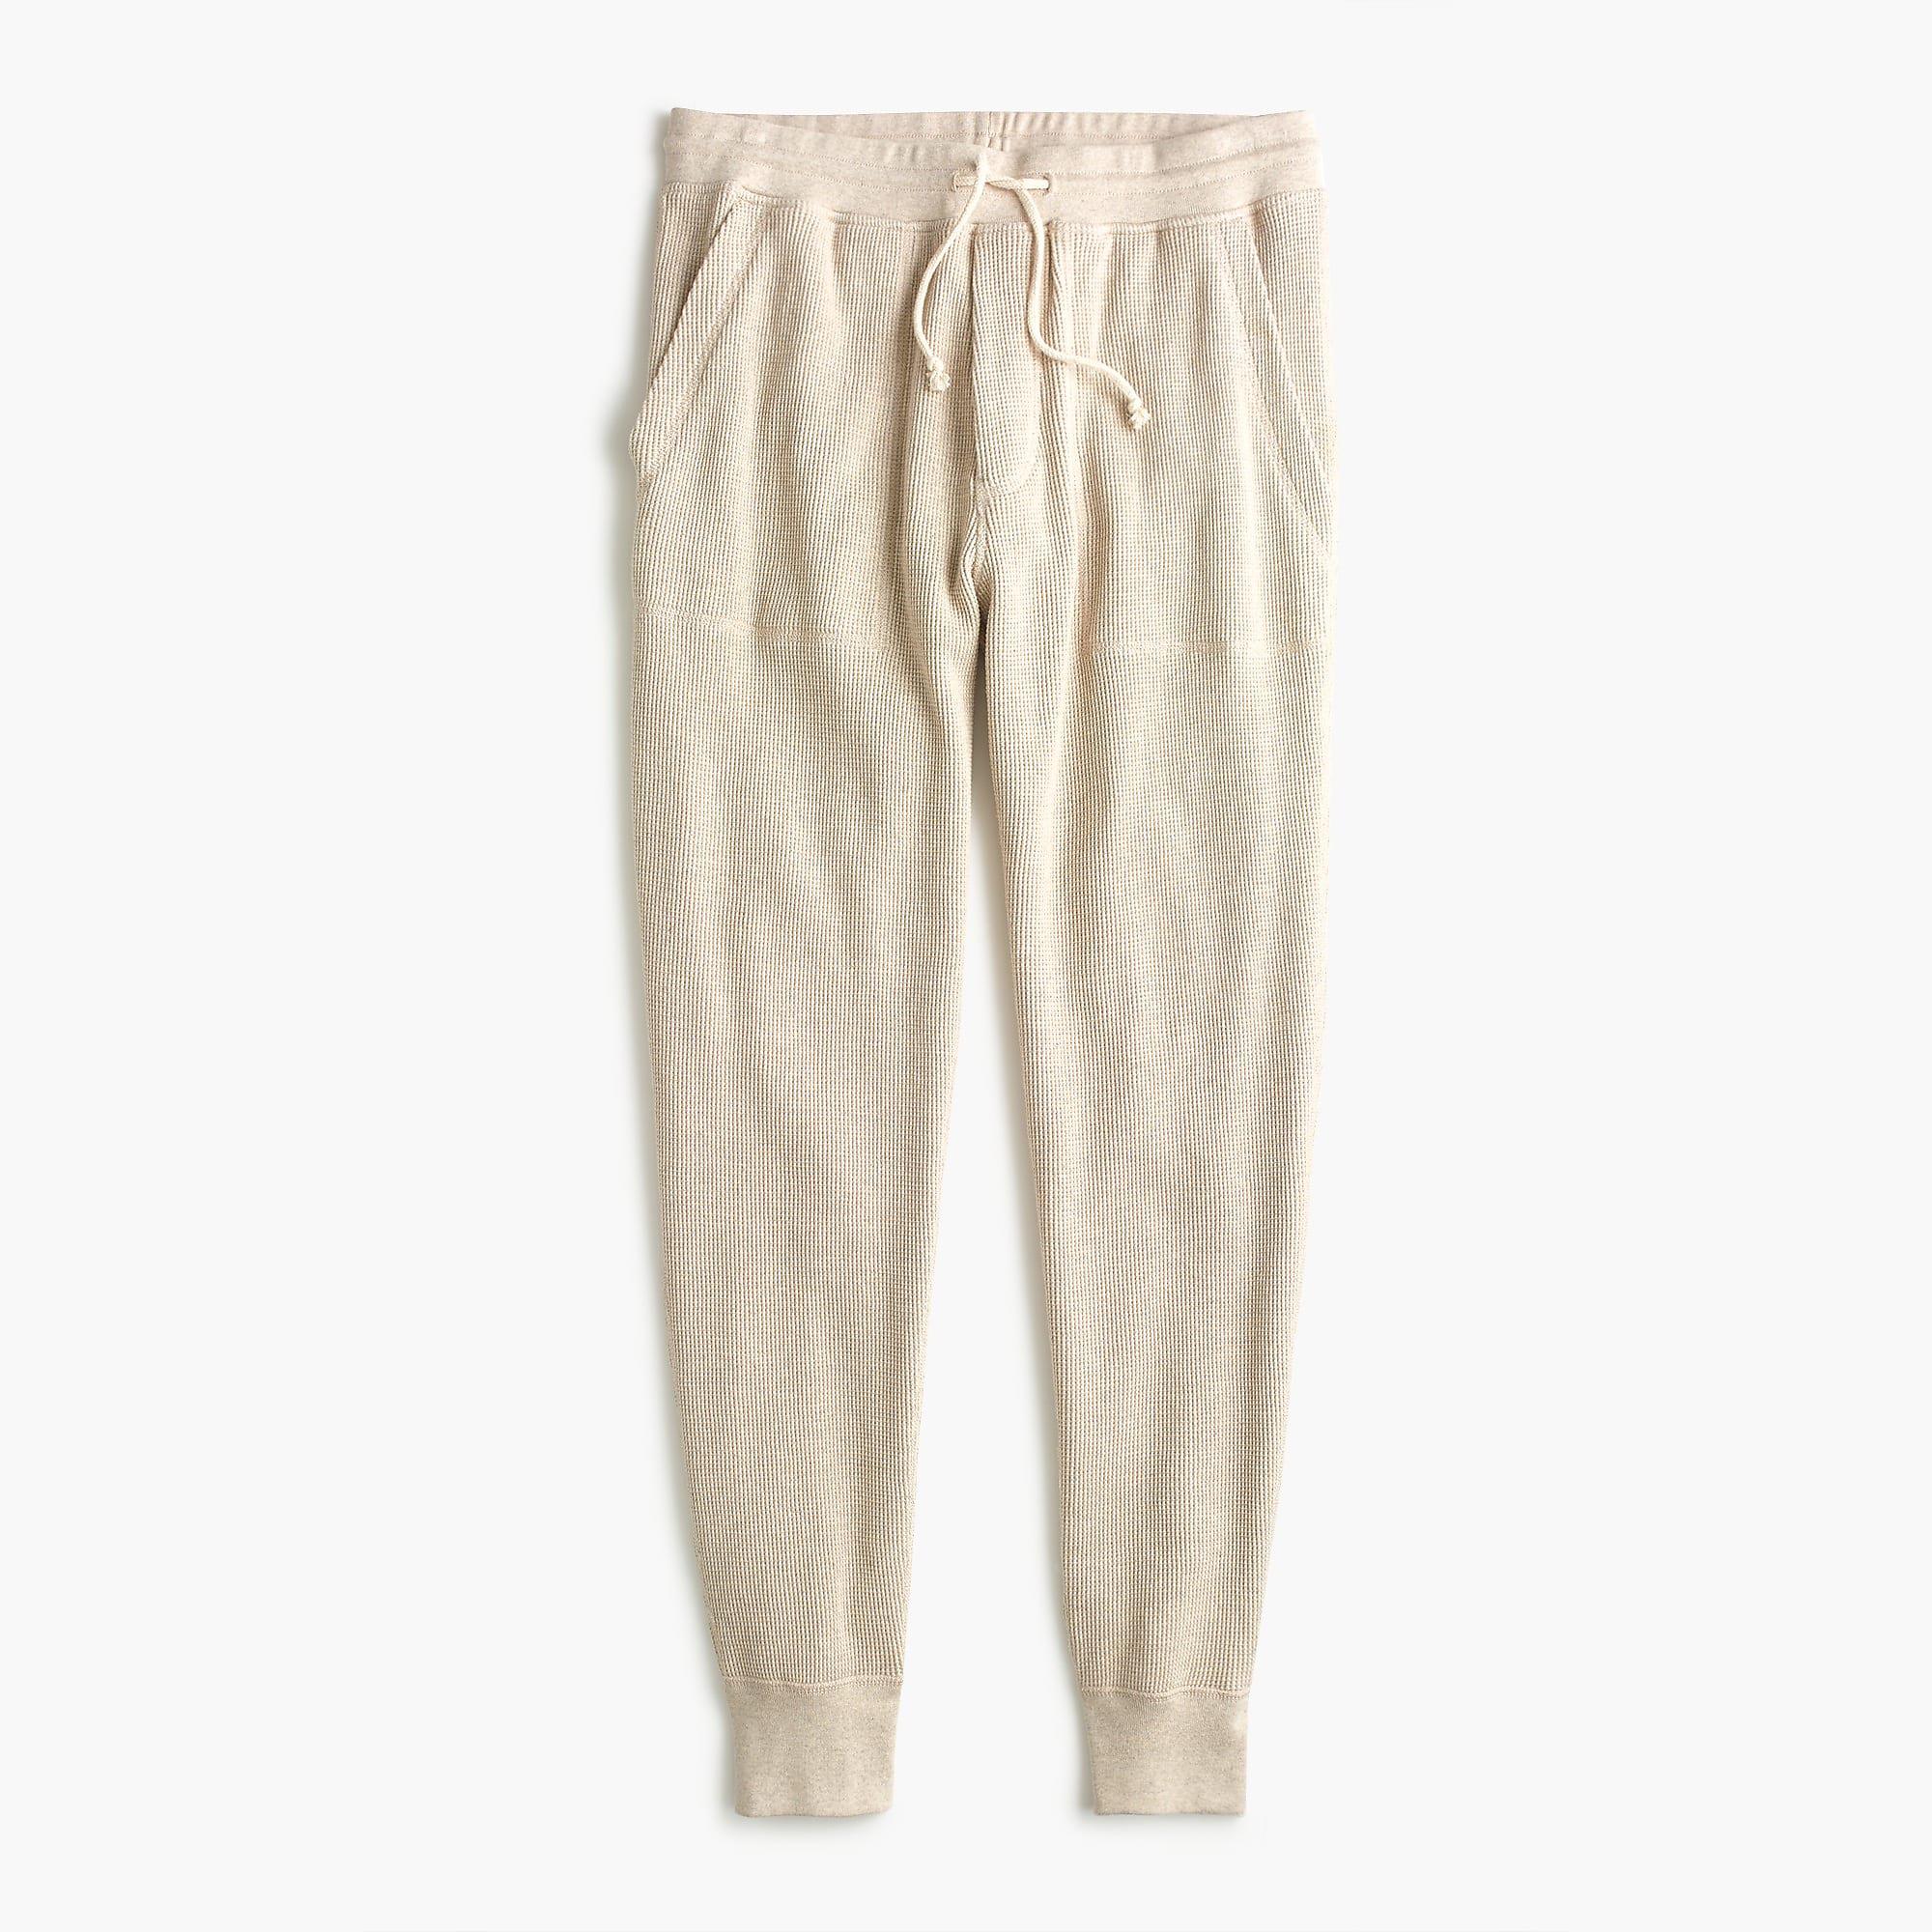 J.Crew Waffle-knit Thermal Lounge Pant in Natural for Men